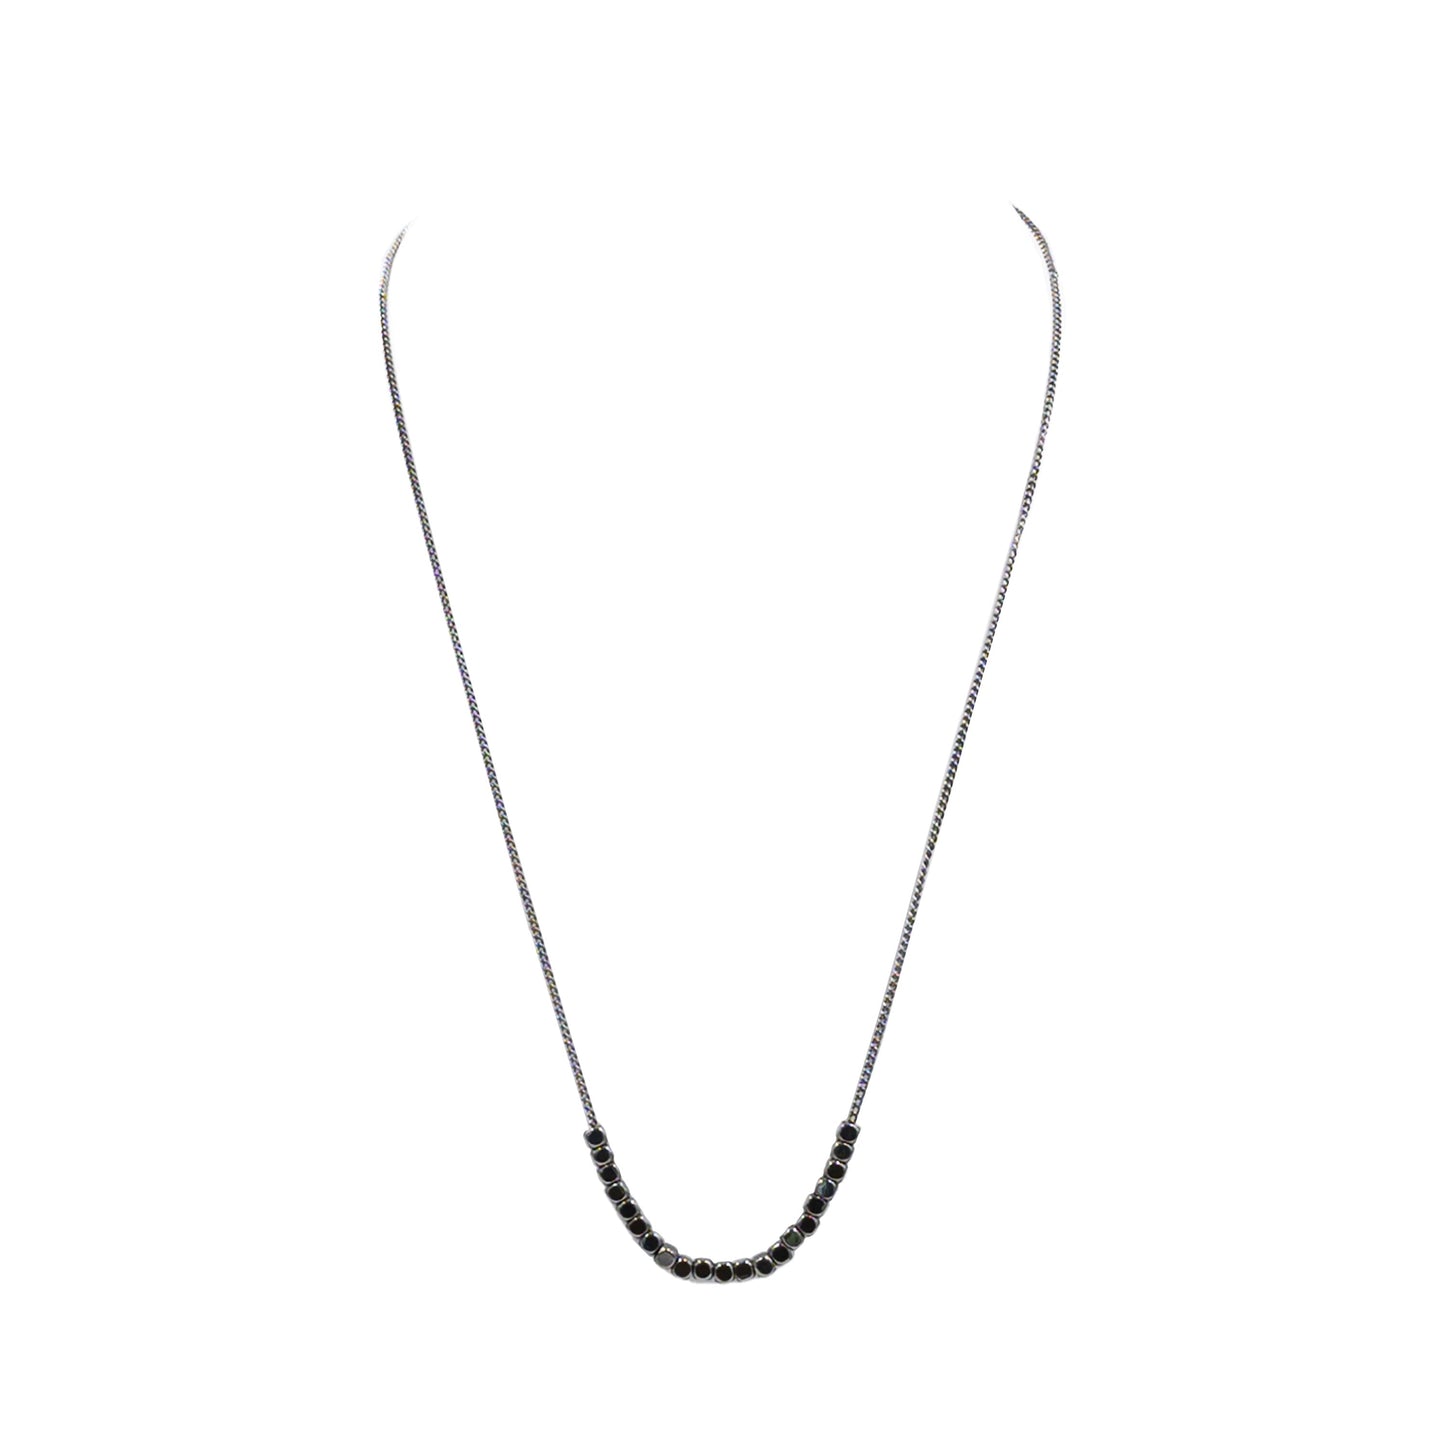 Goddess Collection - Black Crush Necklace